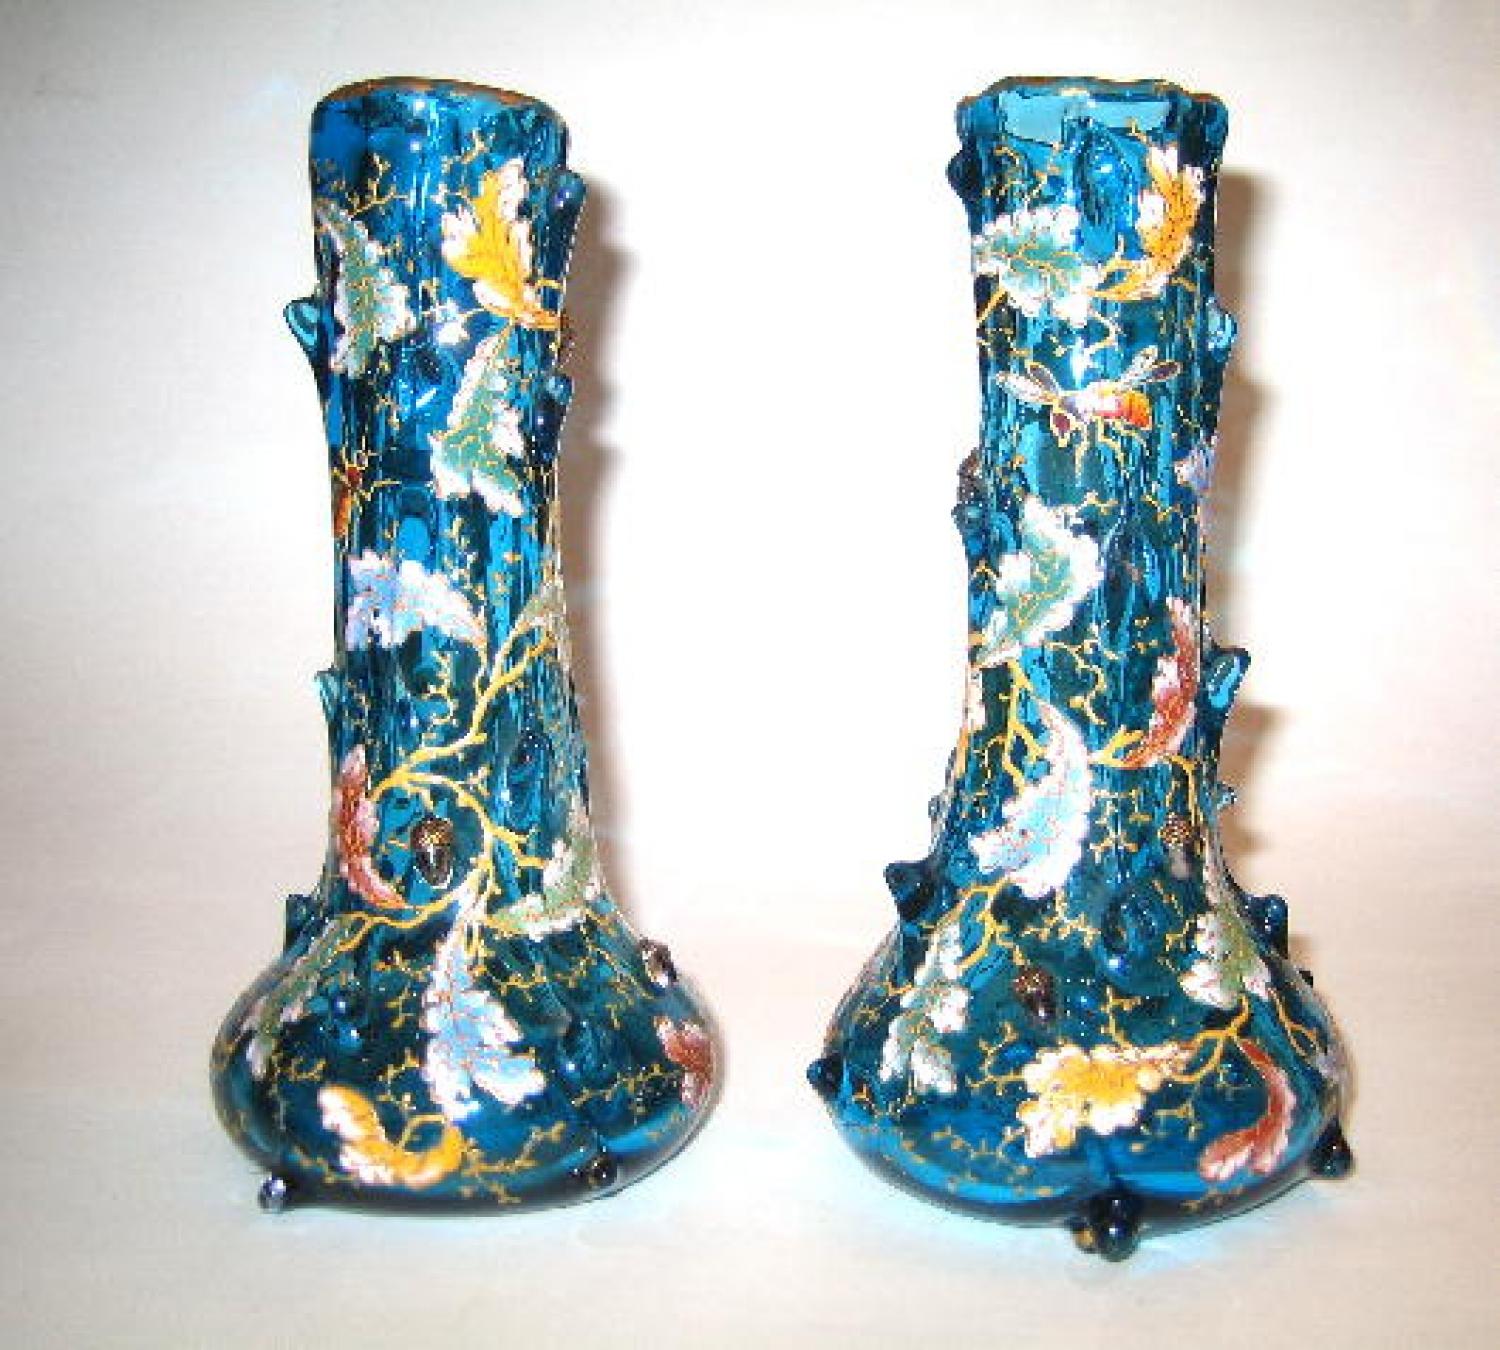 A Pair of Moser Turquoise Glass Vases 